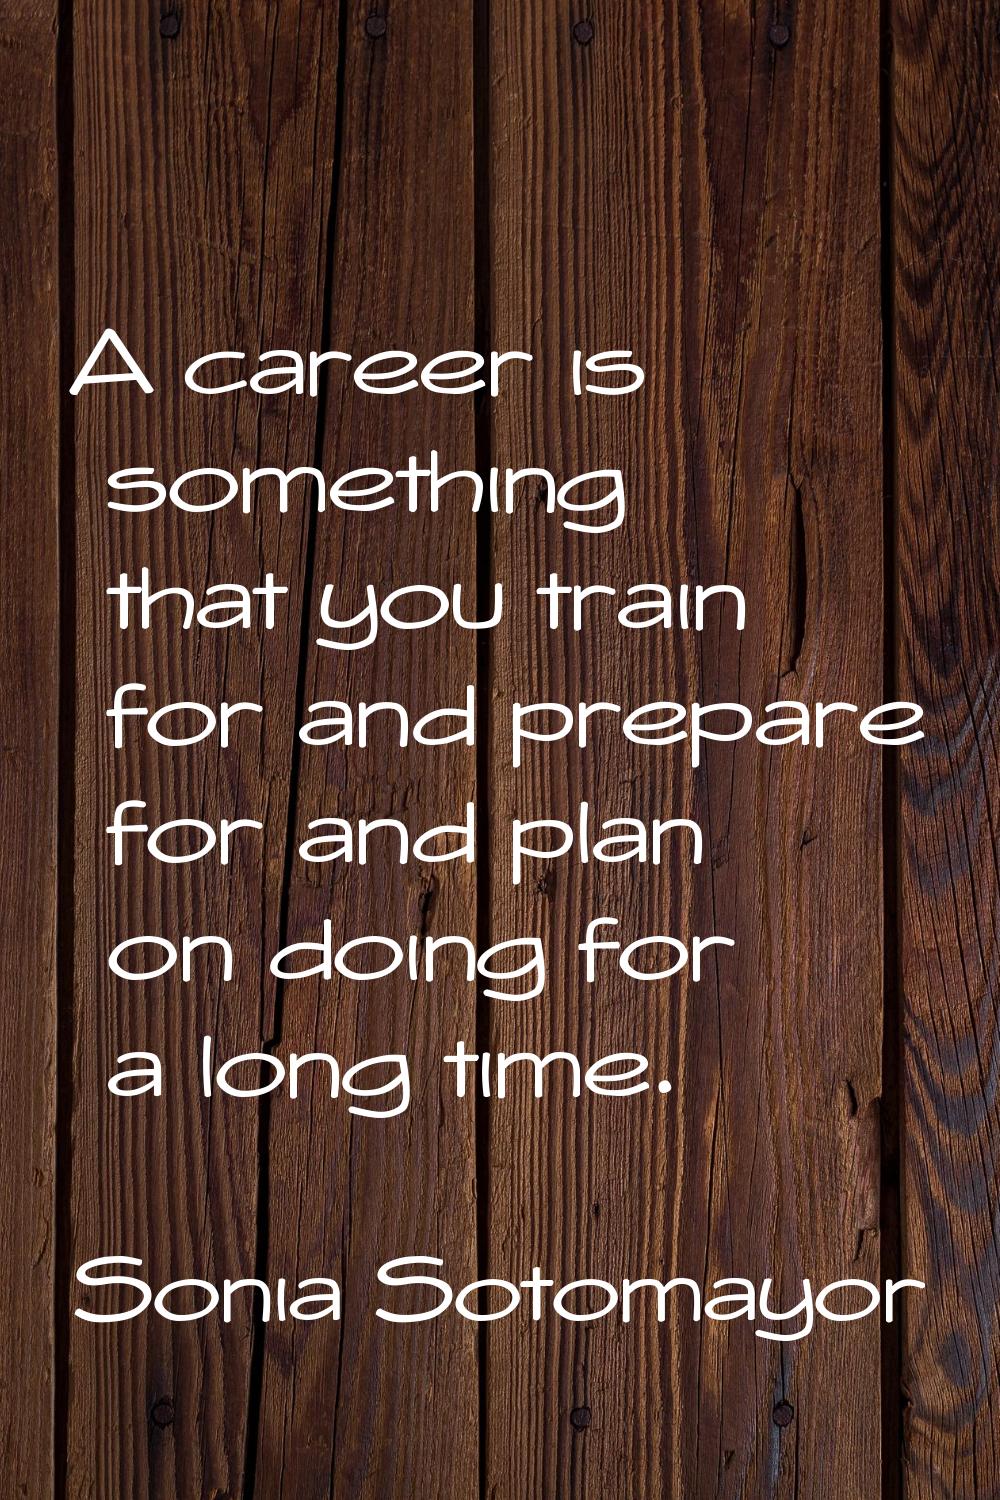 A career is something that you train for and prepare for and plan on doing for a long time.